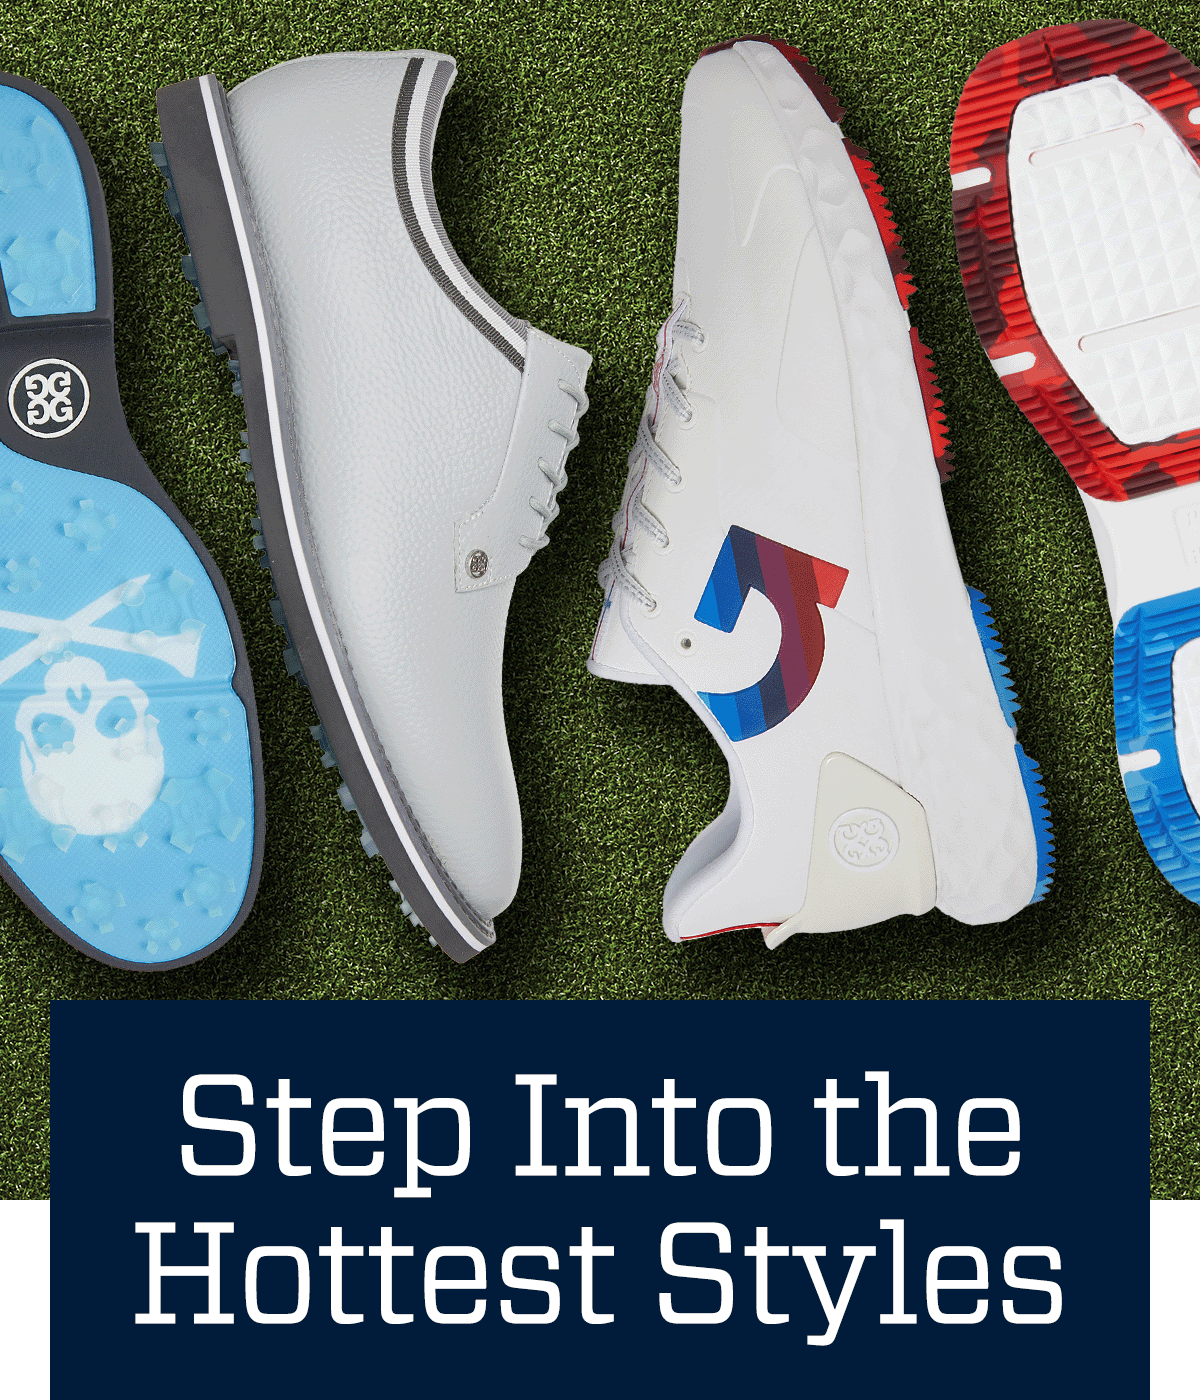 Step into the hottest styles.